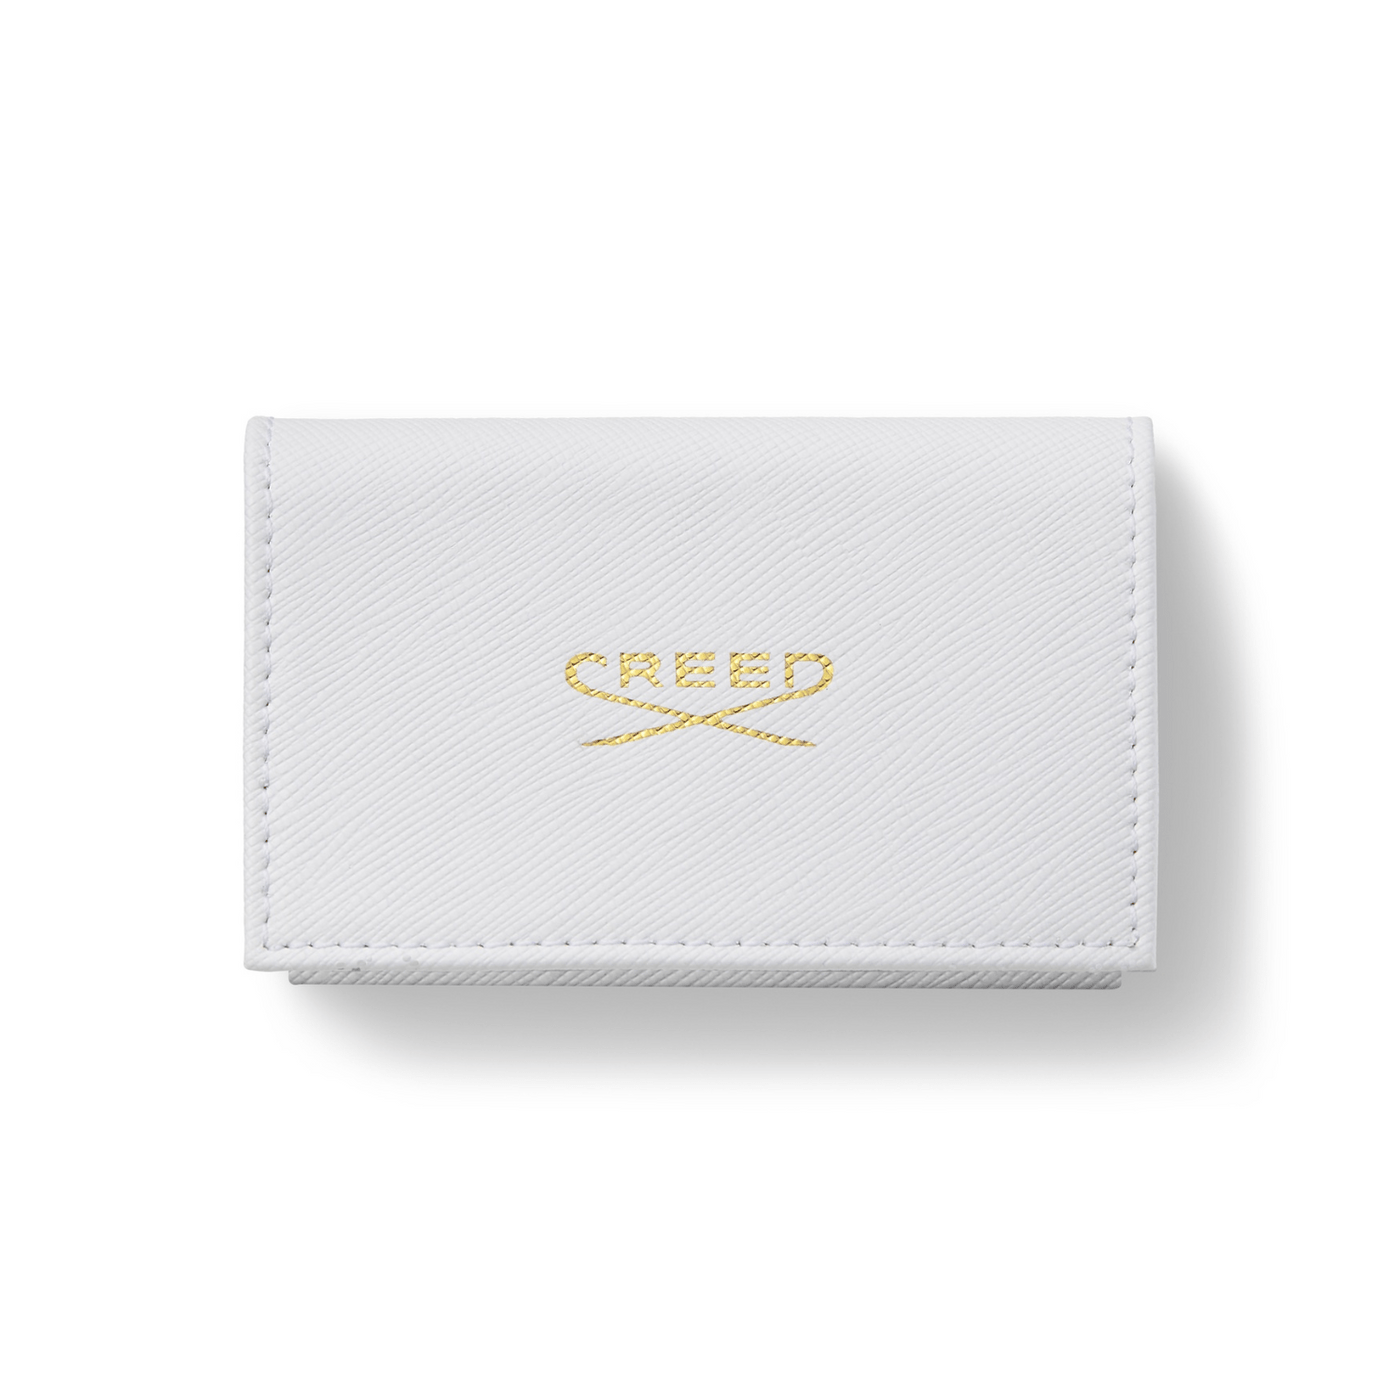 Creed Leather Purse Discovery Set For Her | My Perfume Shop Australia